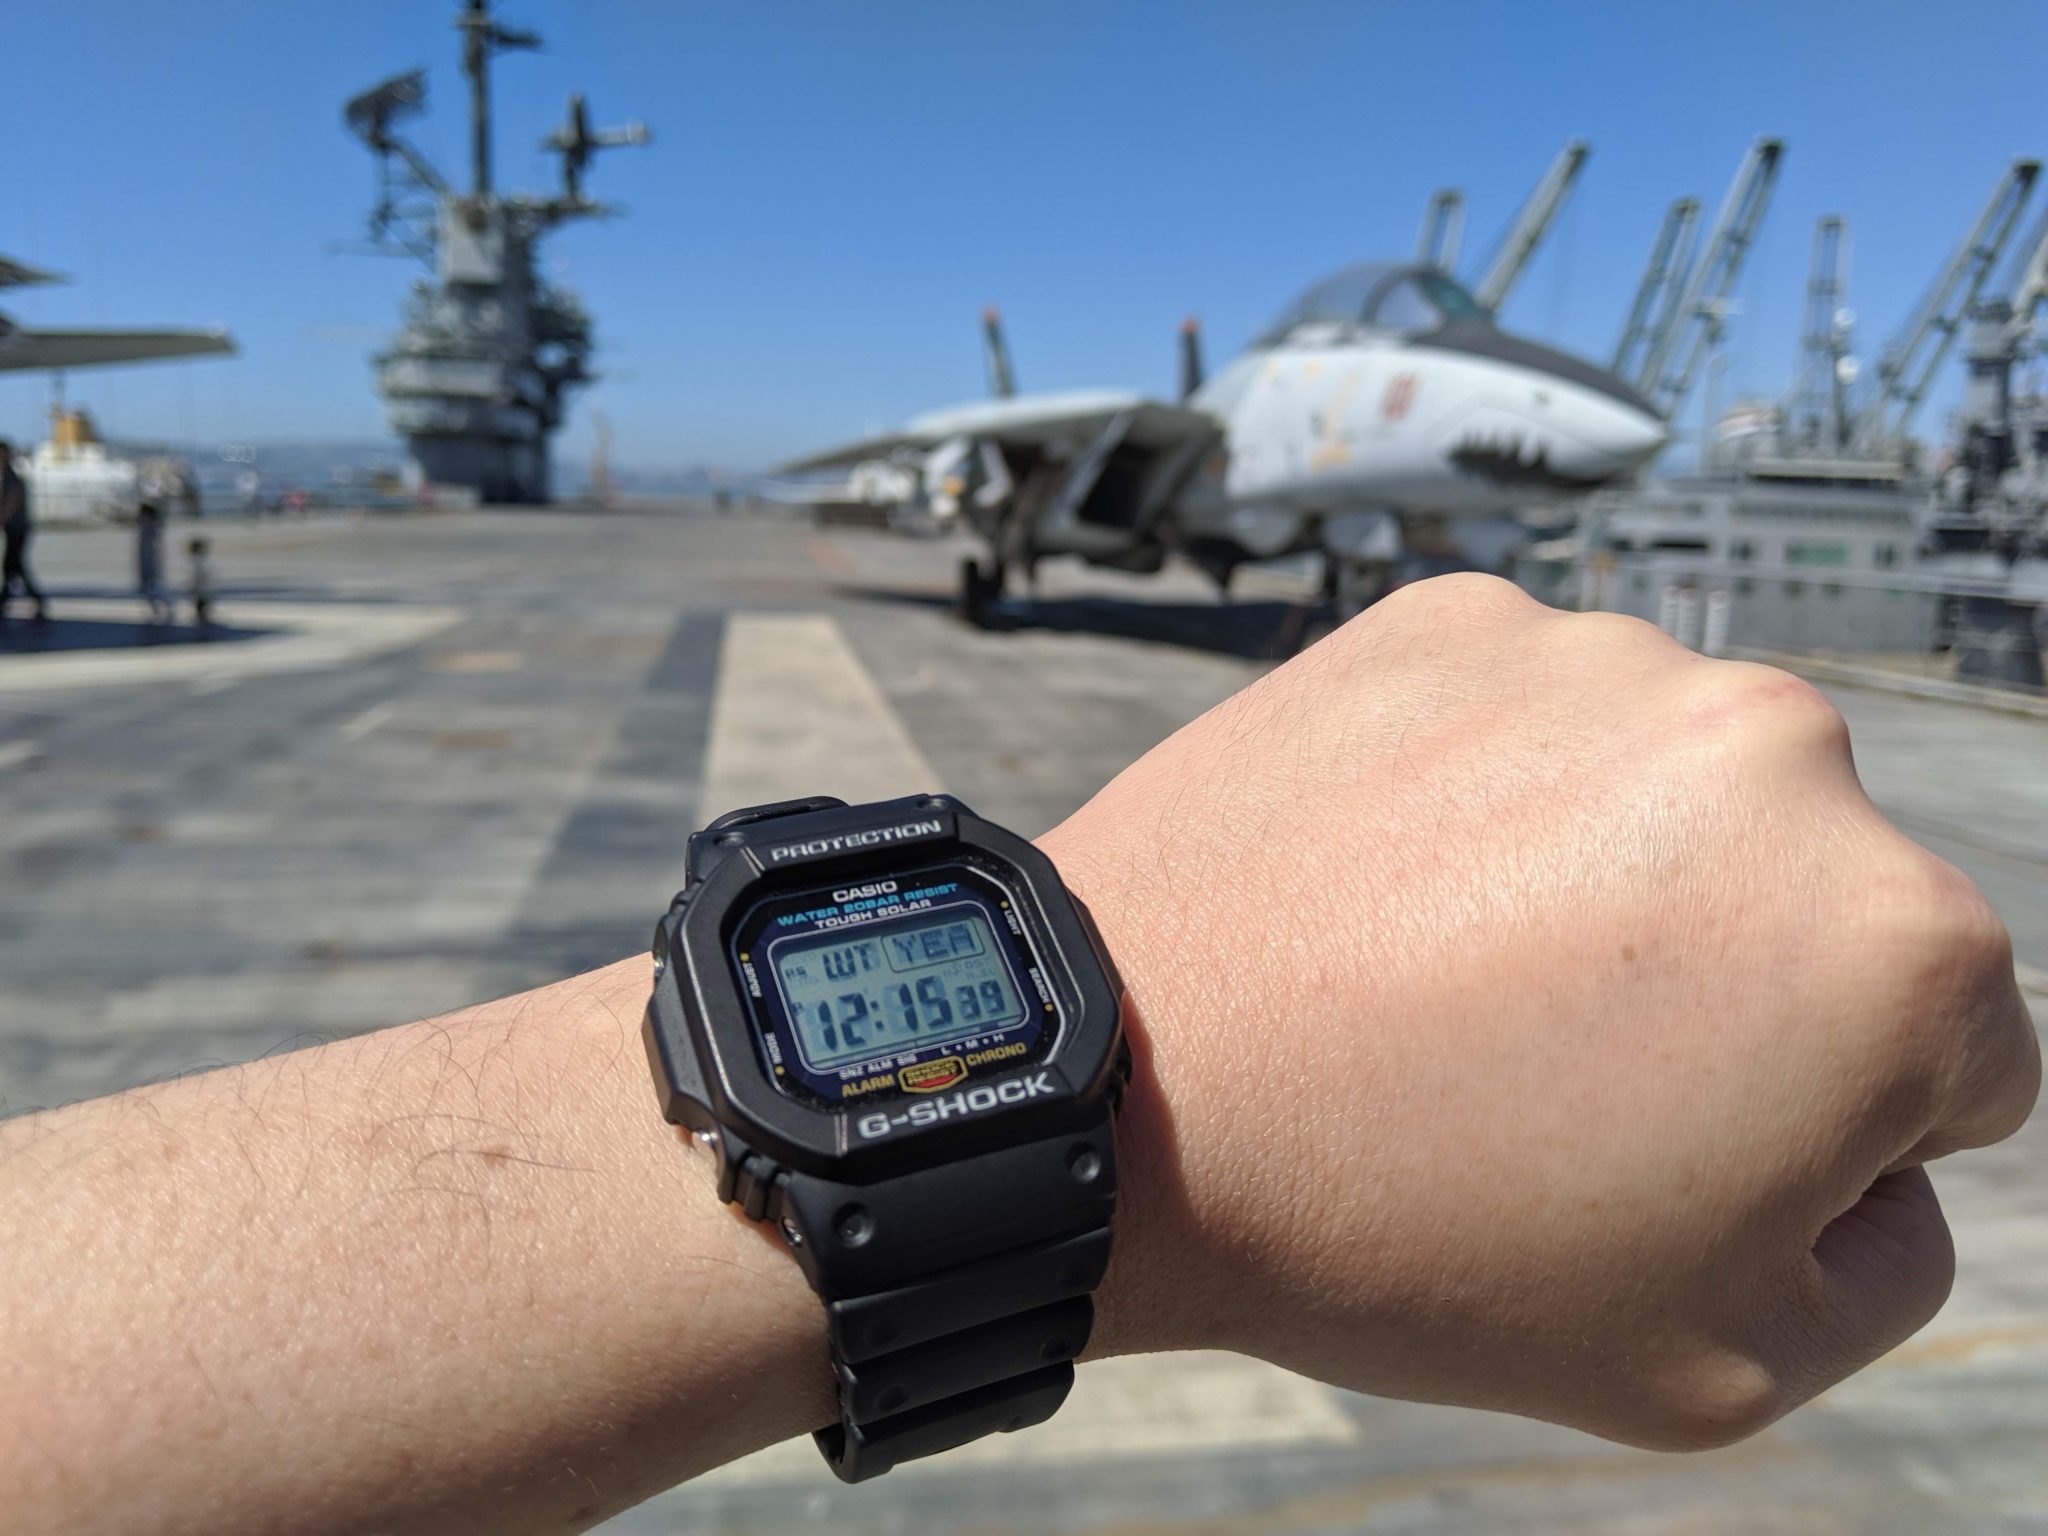 The DW-5600 and G-5600 are basically the the same watch, right?